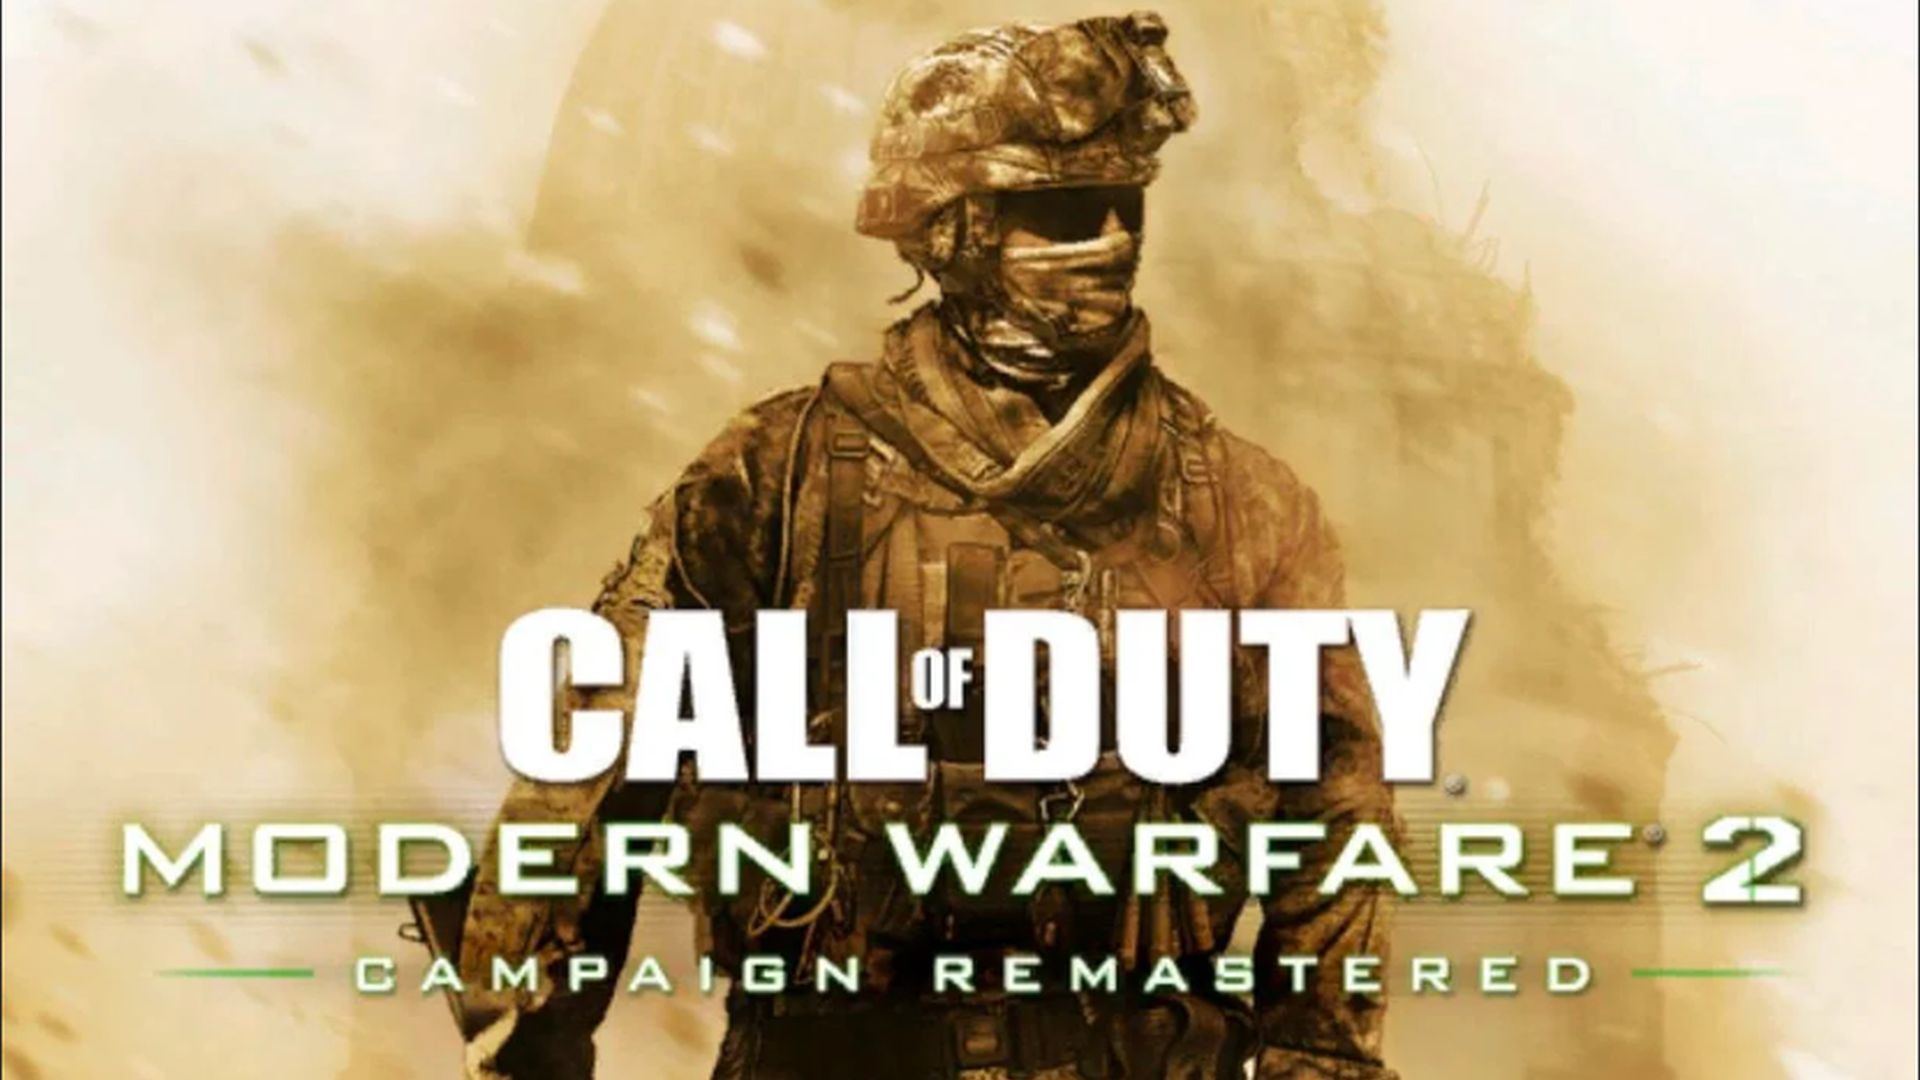 Call of Duty Modern Warfare 2 Campaign Remastered